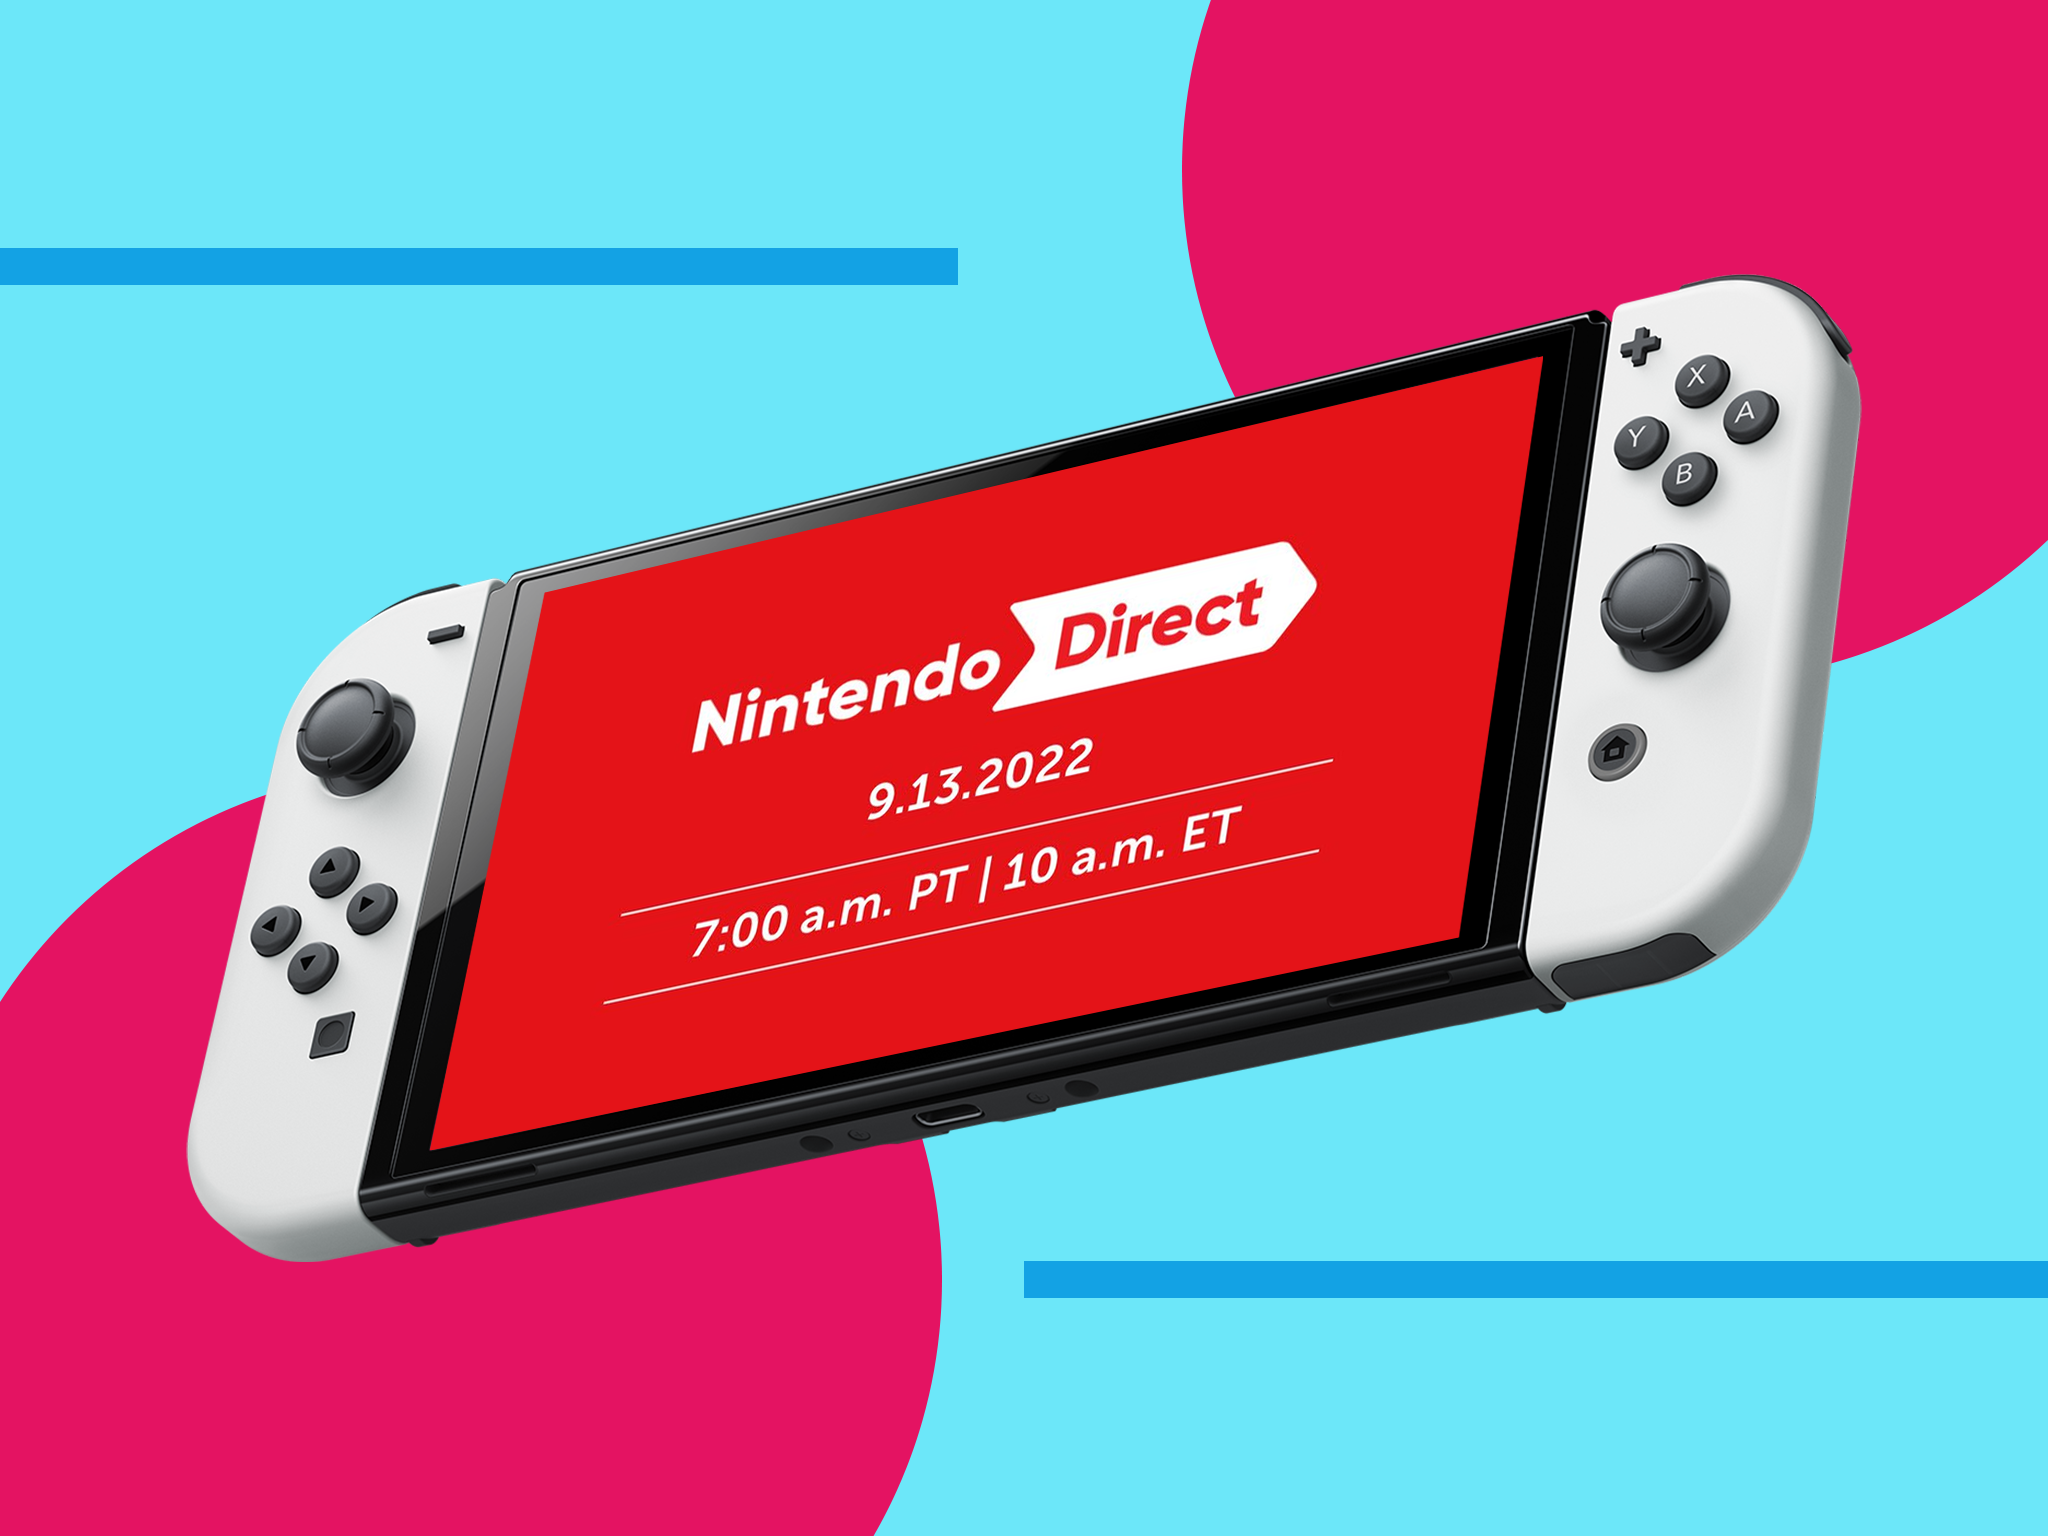 Nintendo Direct September 2022 Date, start time and how to watch the